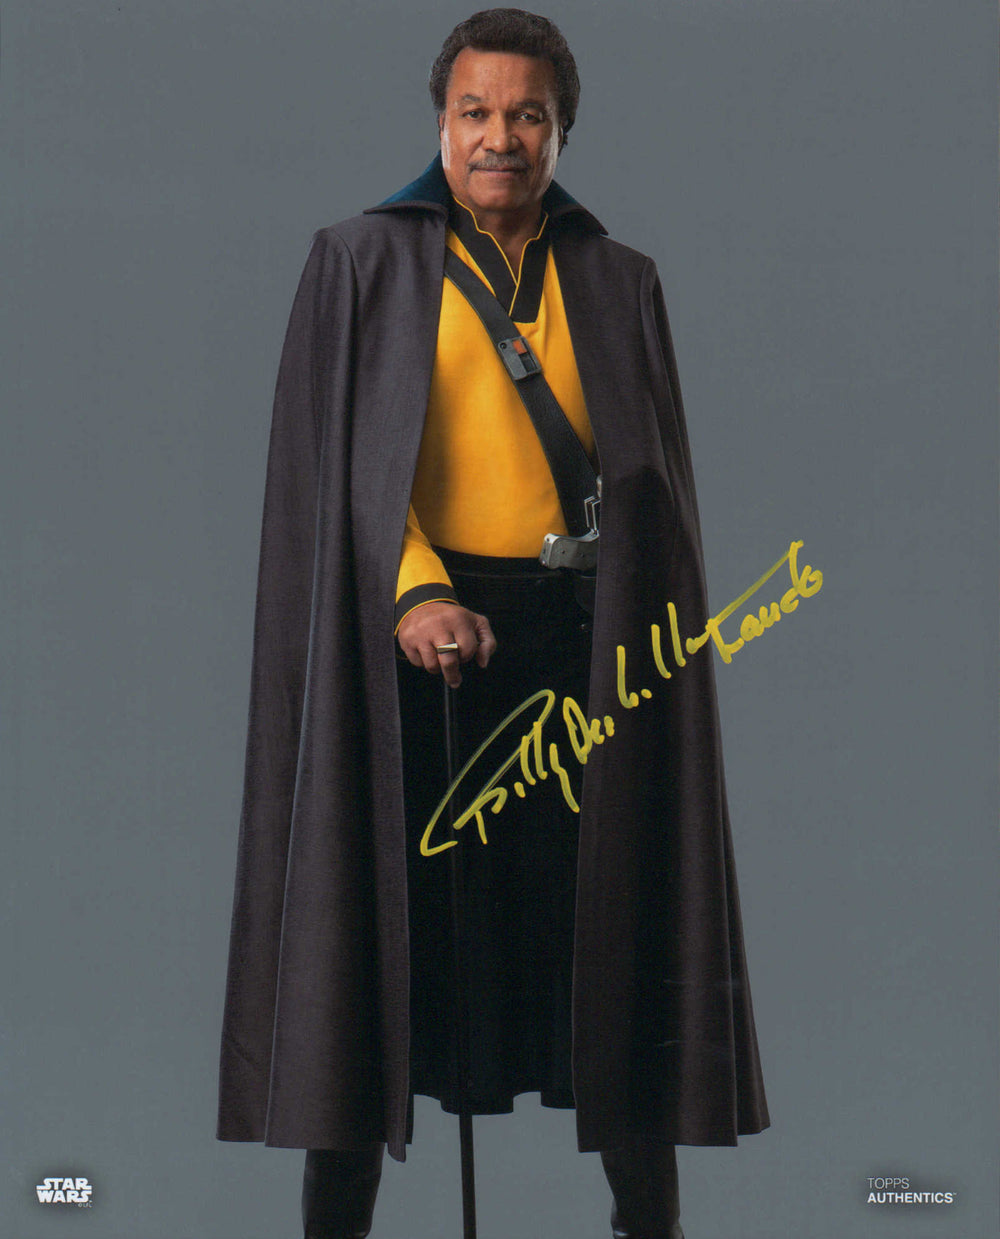 Billy Dee Williams as Lando in Star Wars: The Rise of Skywalker (Coolwaters) Signed 8x10 Photo with Character Name